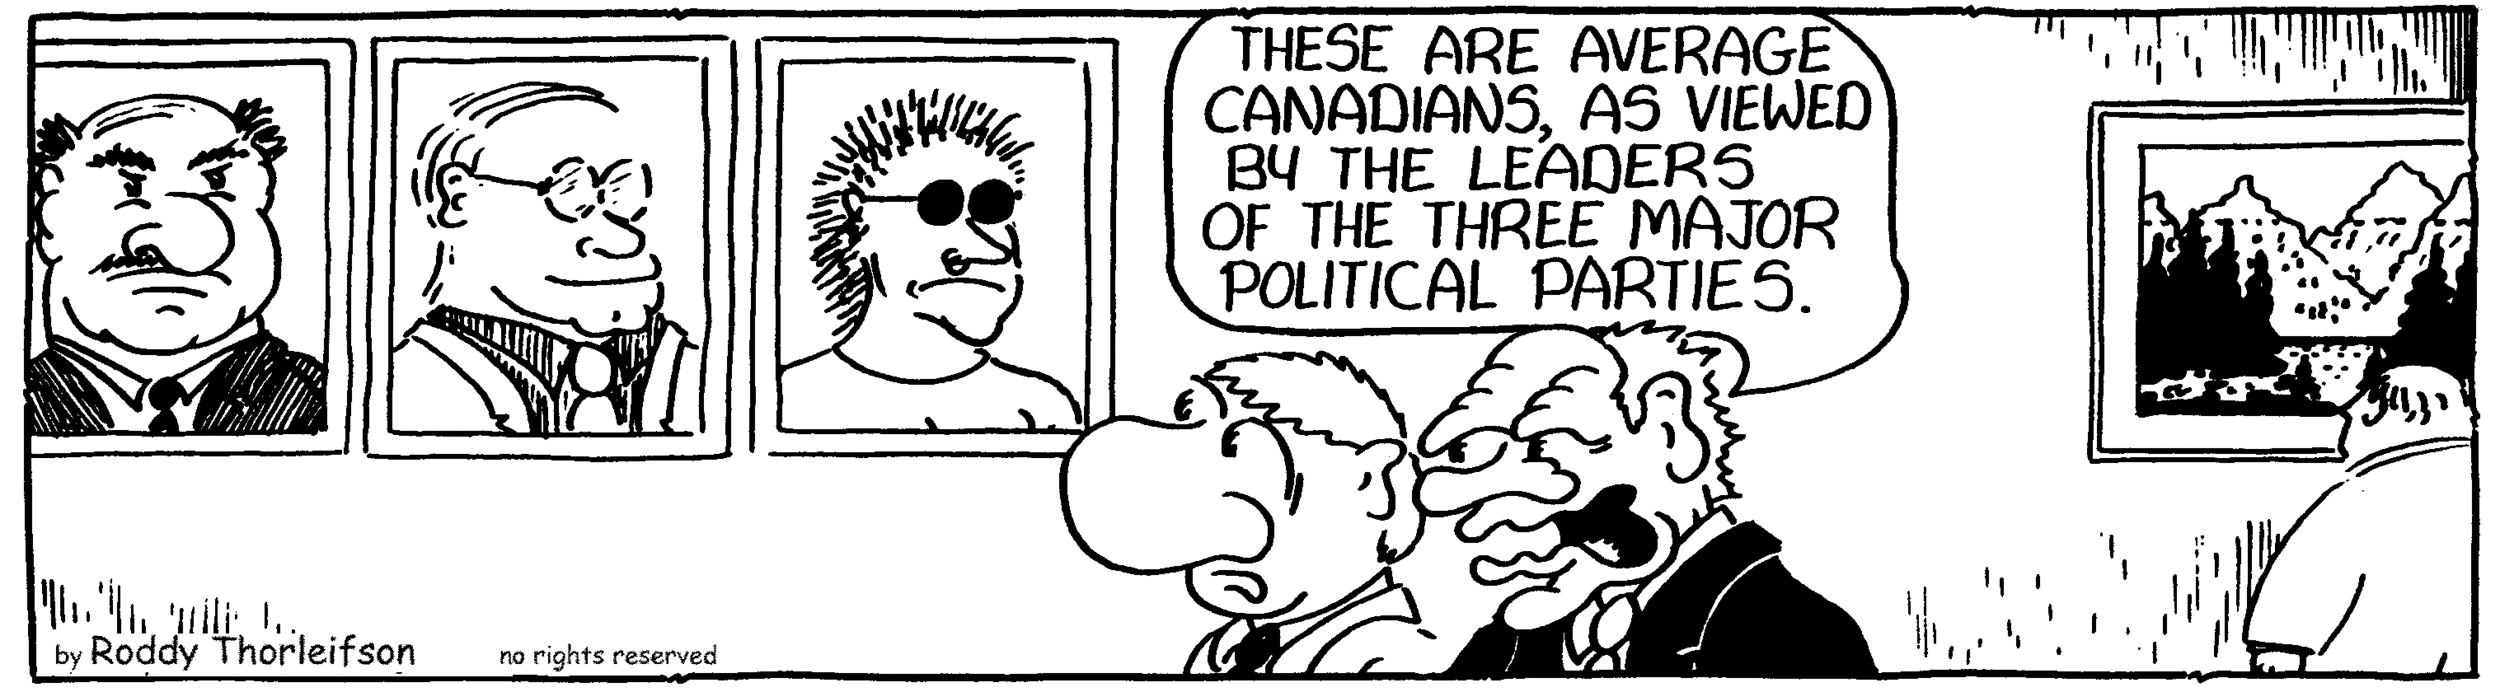 free cartoon Canada political parties as viewed by average Canadians